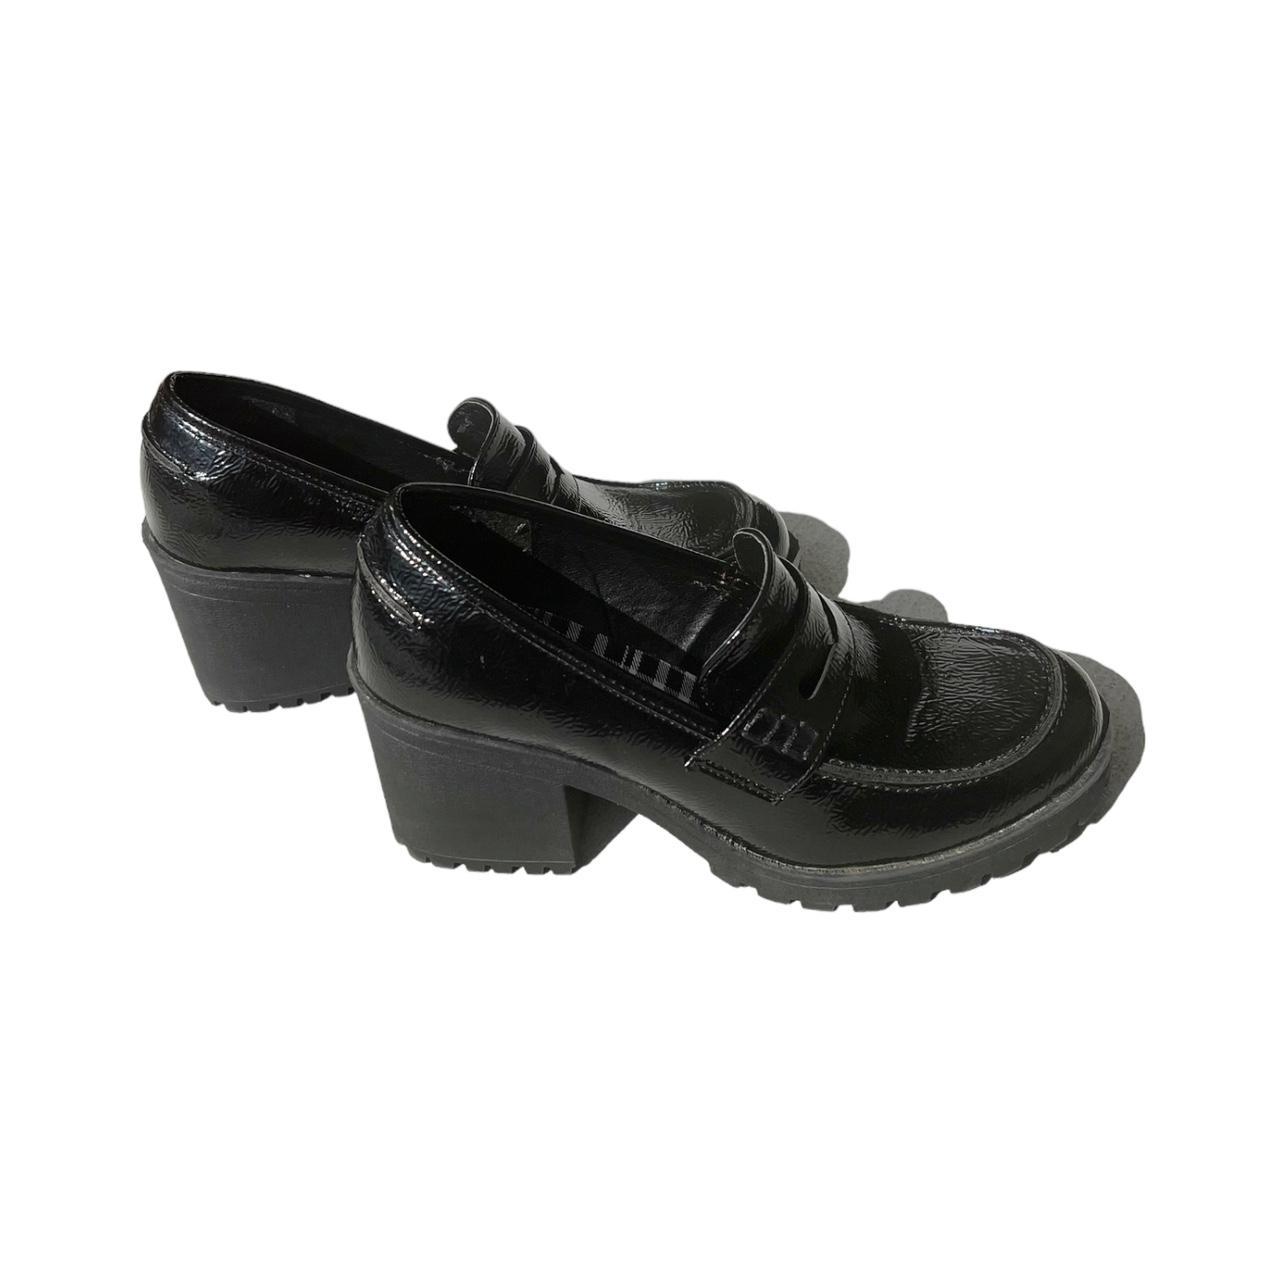 Dirty Laundry Women's Black Loafers (2)